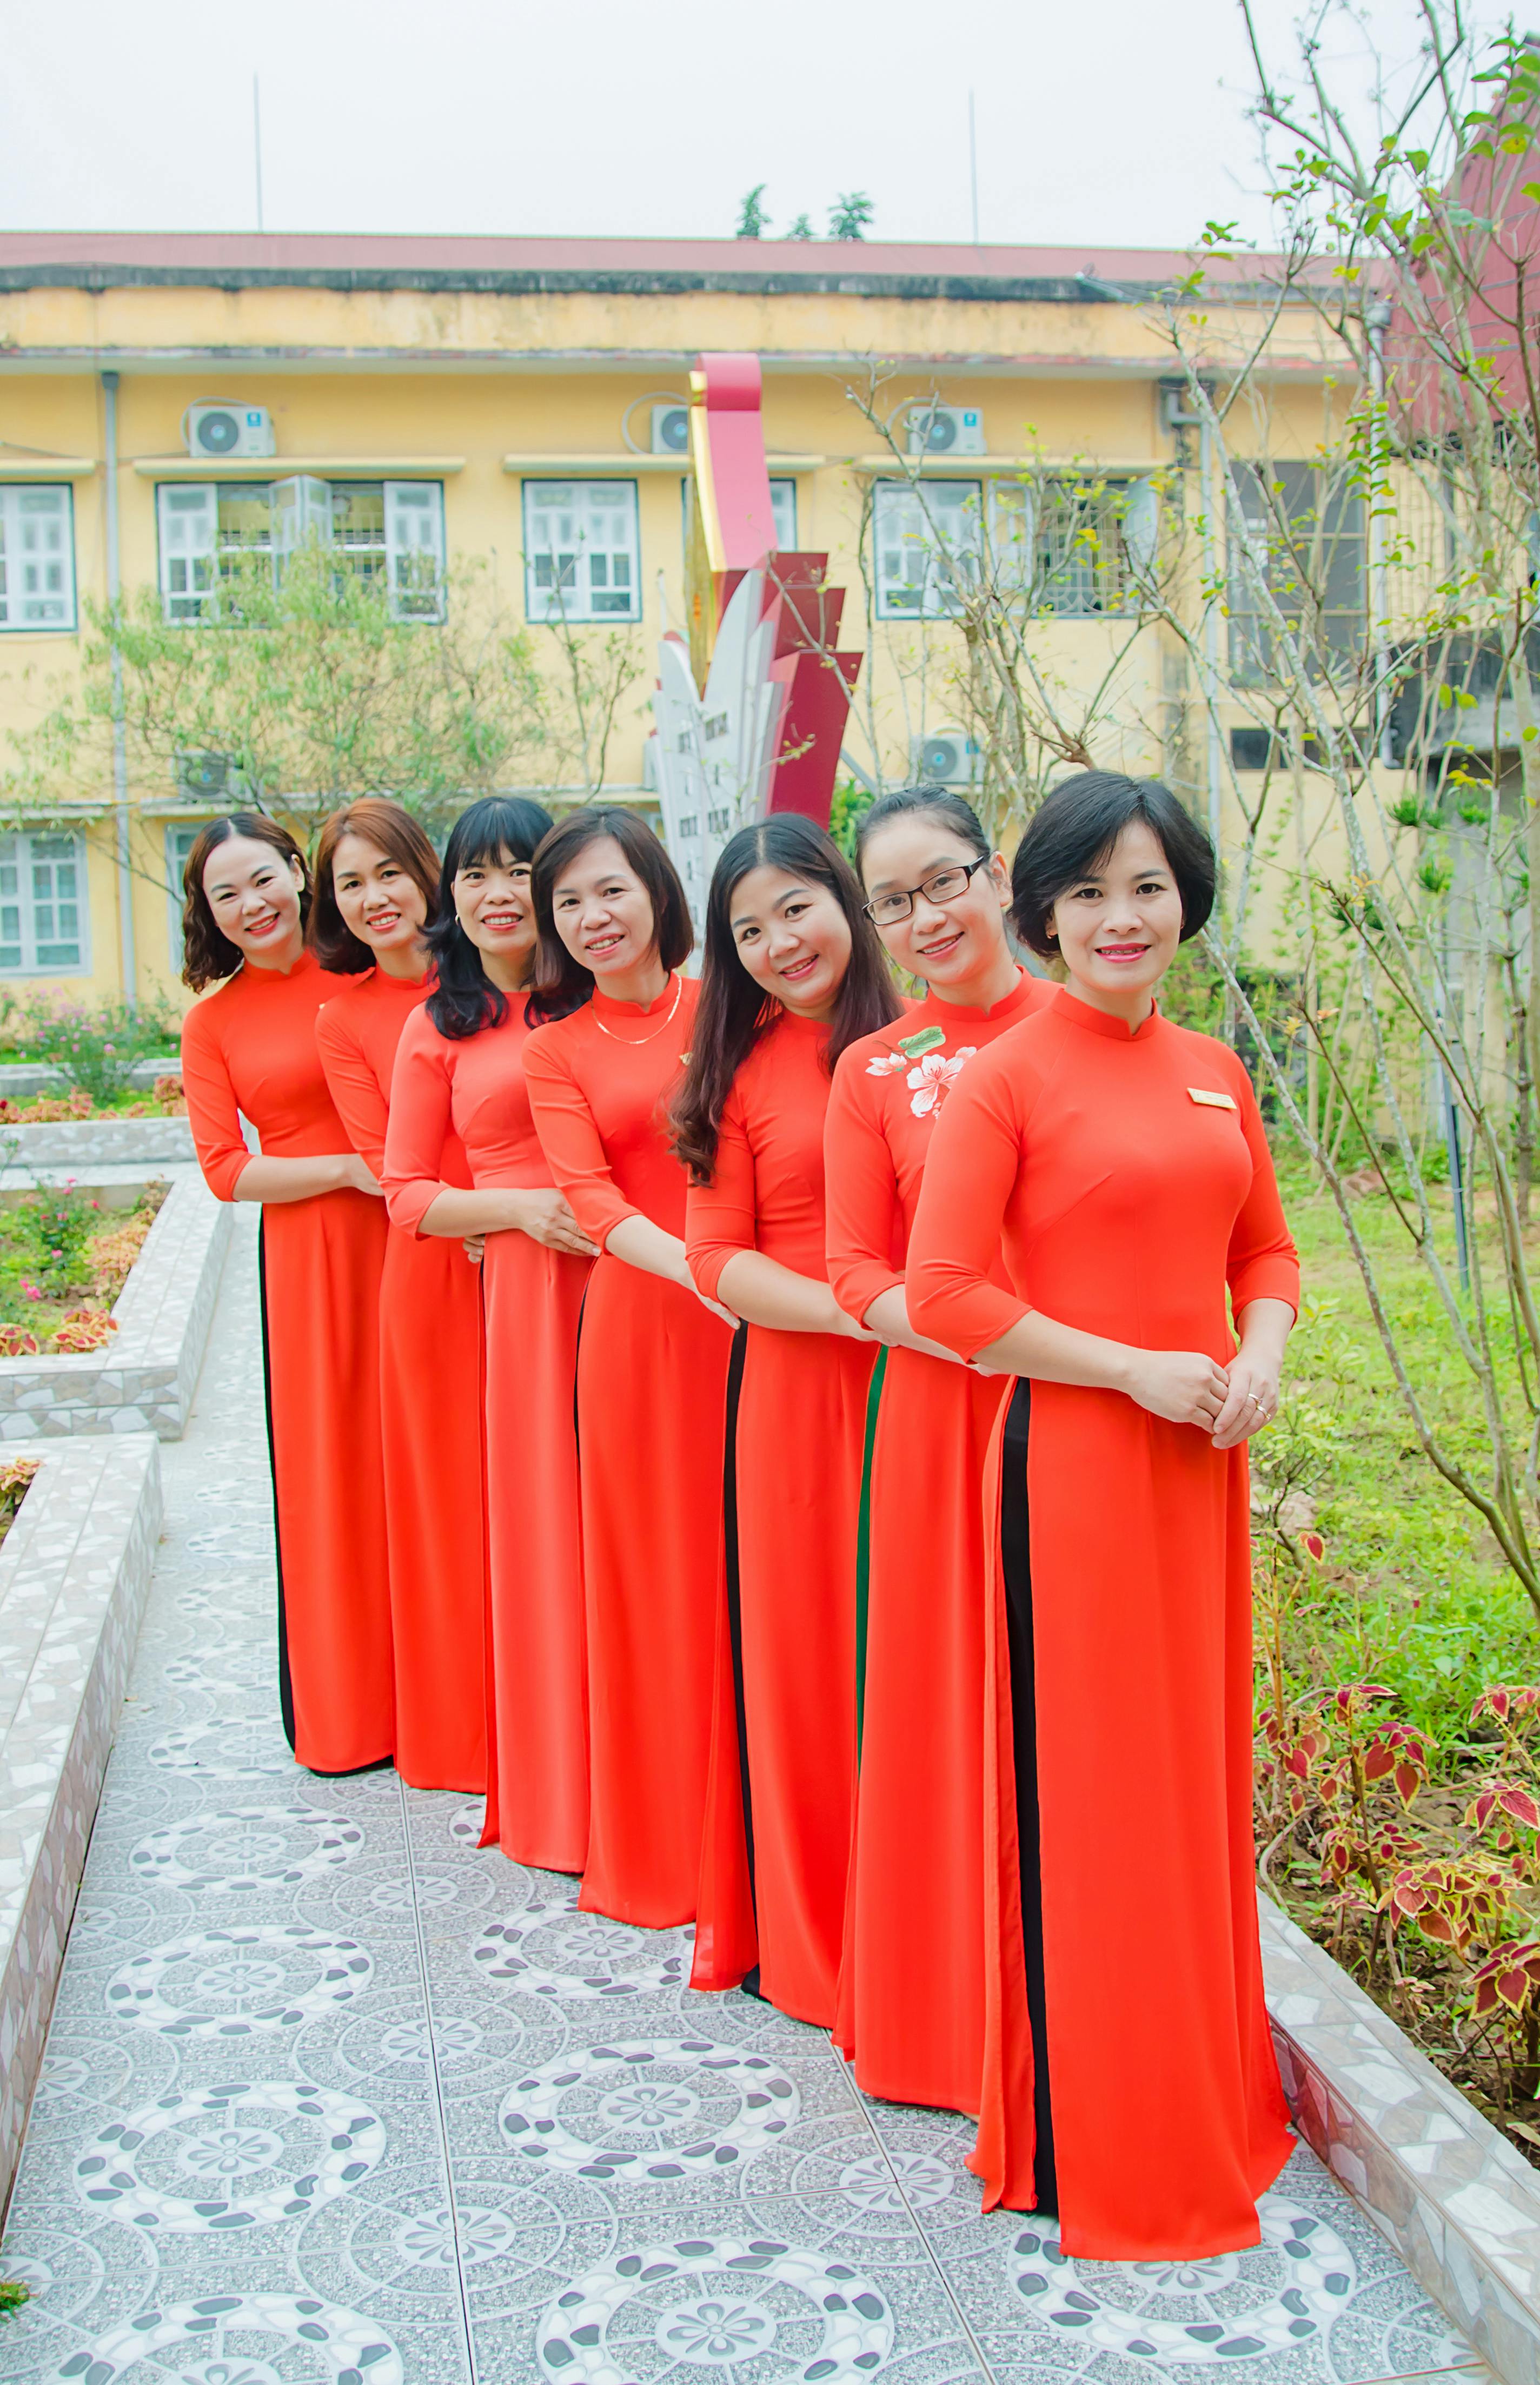 group of women in red dresses posing together